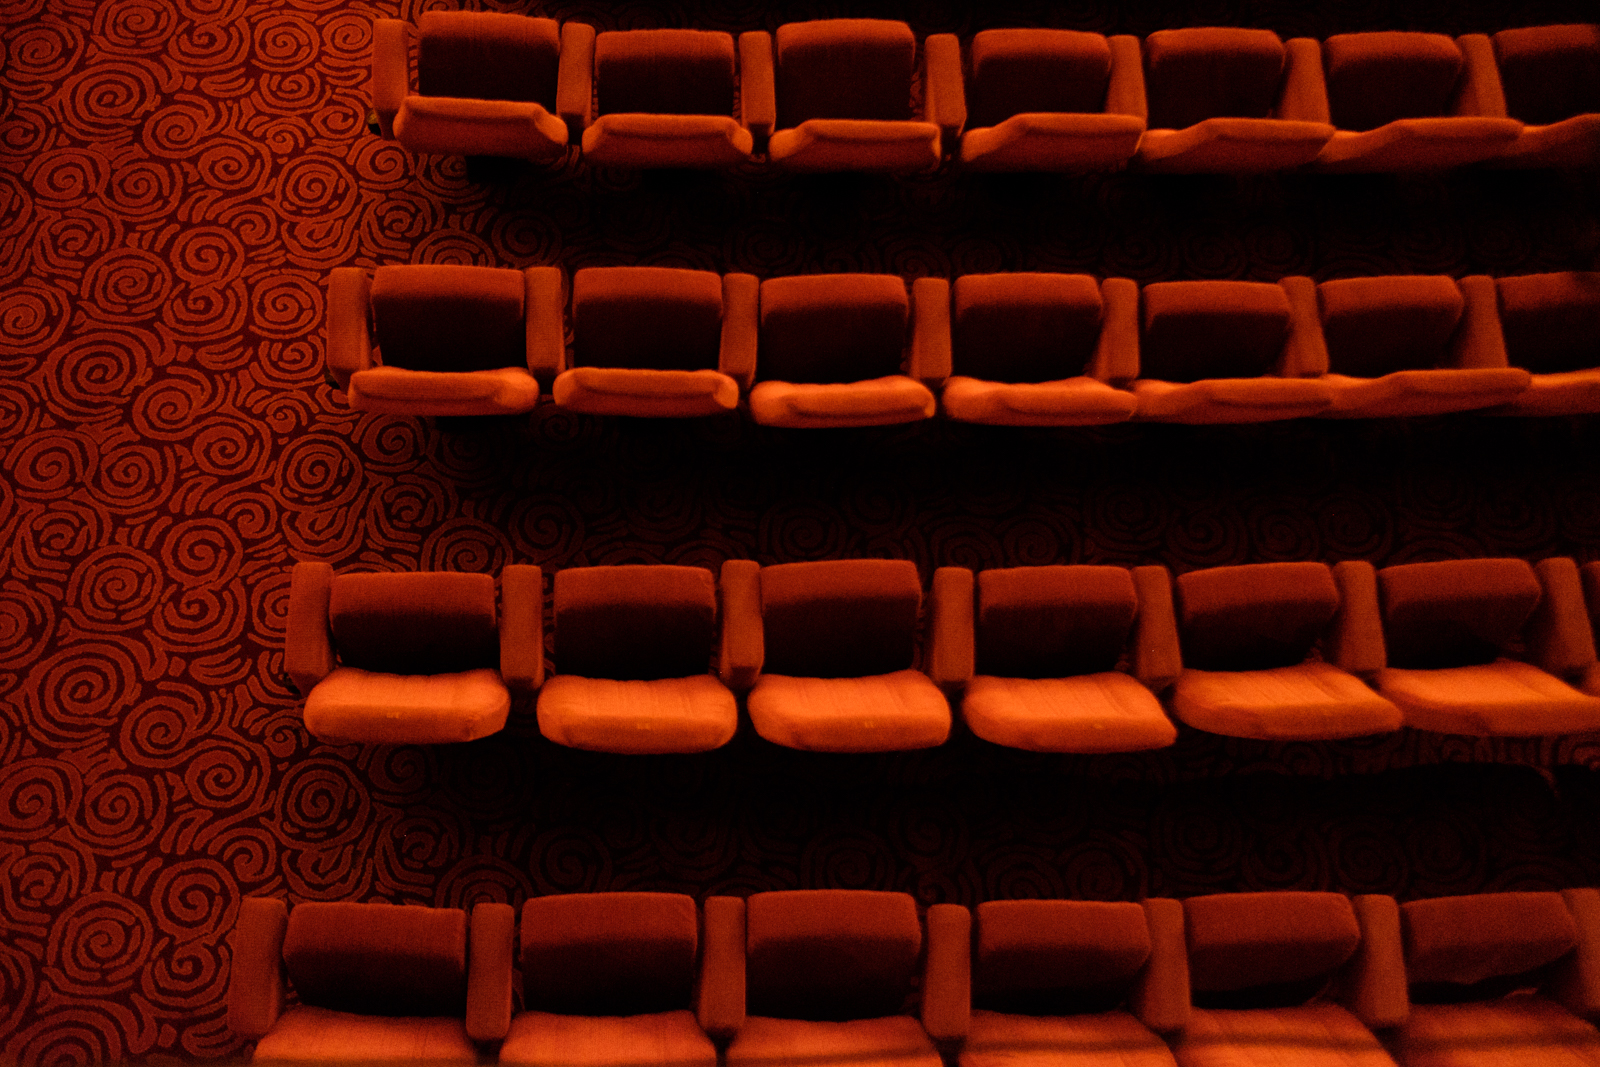 Seating at The Theater of Casino du Liban. For decades it hosted national and international artists, but is currently closed (MEE/Rita Kabalan)